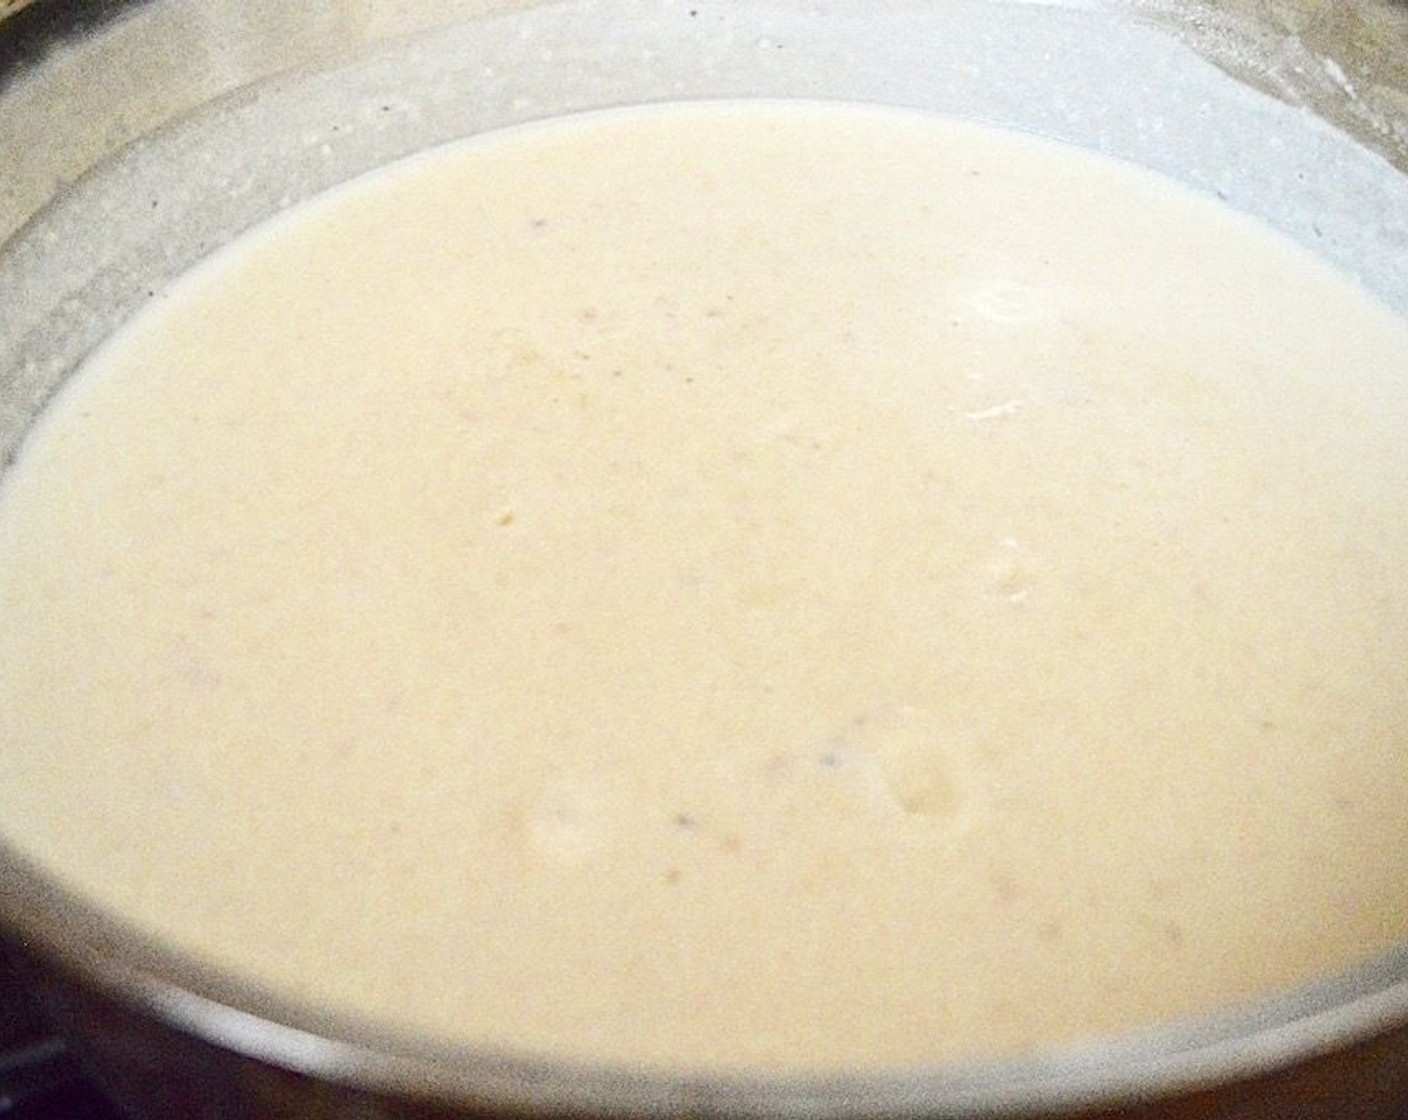 step 5 Slowly pour in the Milk (3 cups) while you keep whisking until you have a nice, smooth sauce. Stir in the Salt (1 pinch), McCormick® Garlic Powder (1 tsp) powder and Dijon Mustard (1 tsp) then let it all gently bubble and thicken together for 10 minutes.